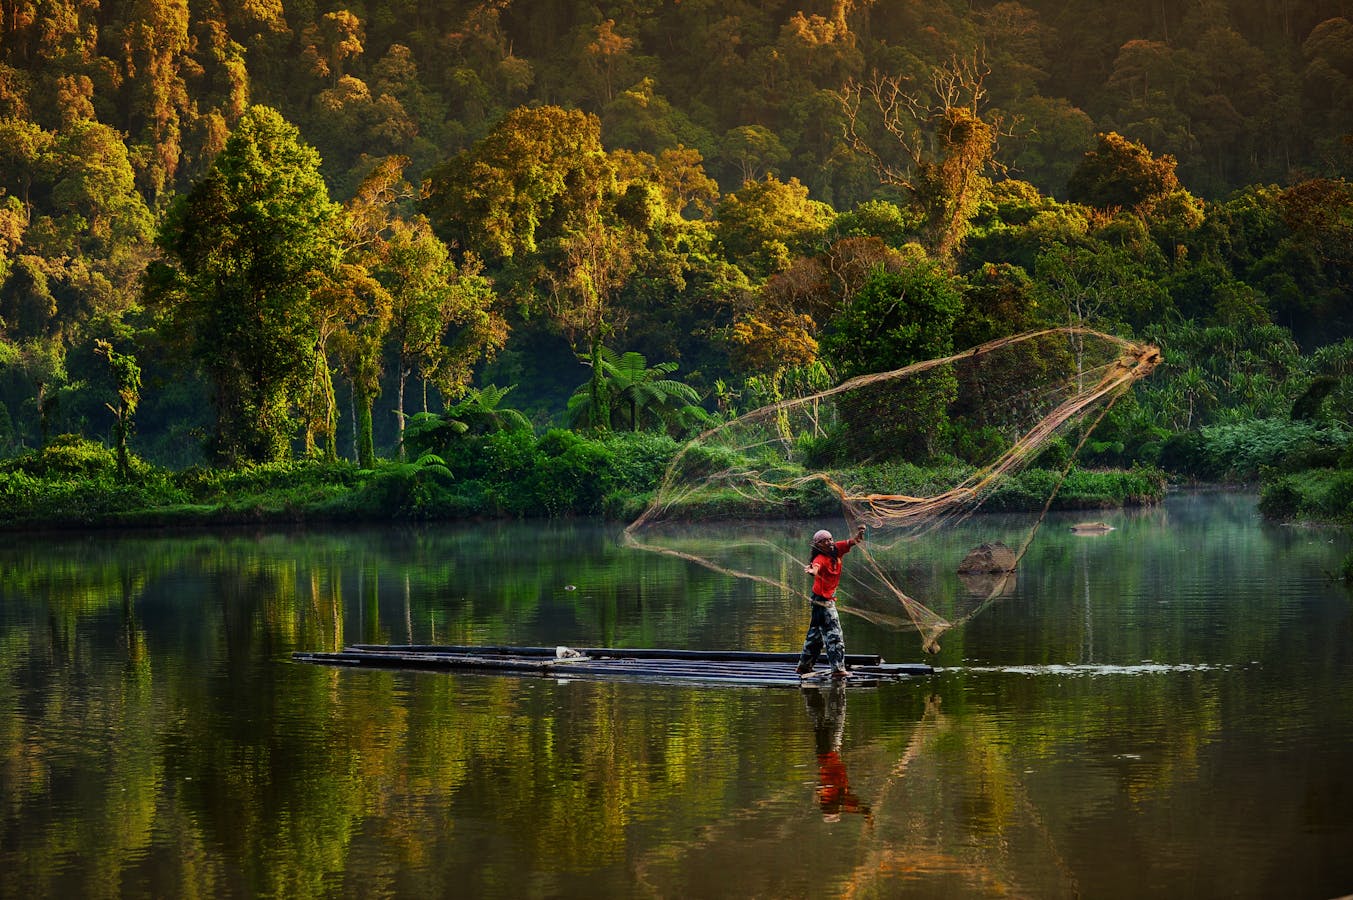 A man in West Java, Indonesia fishing in the lake using a traditional net.